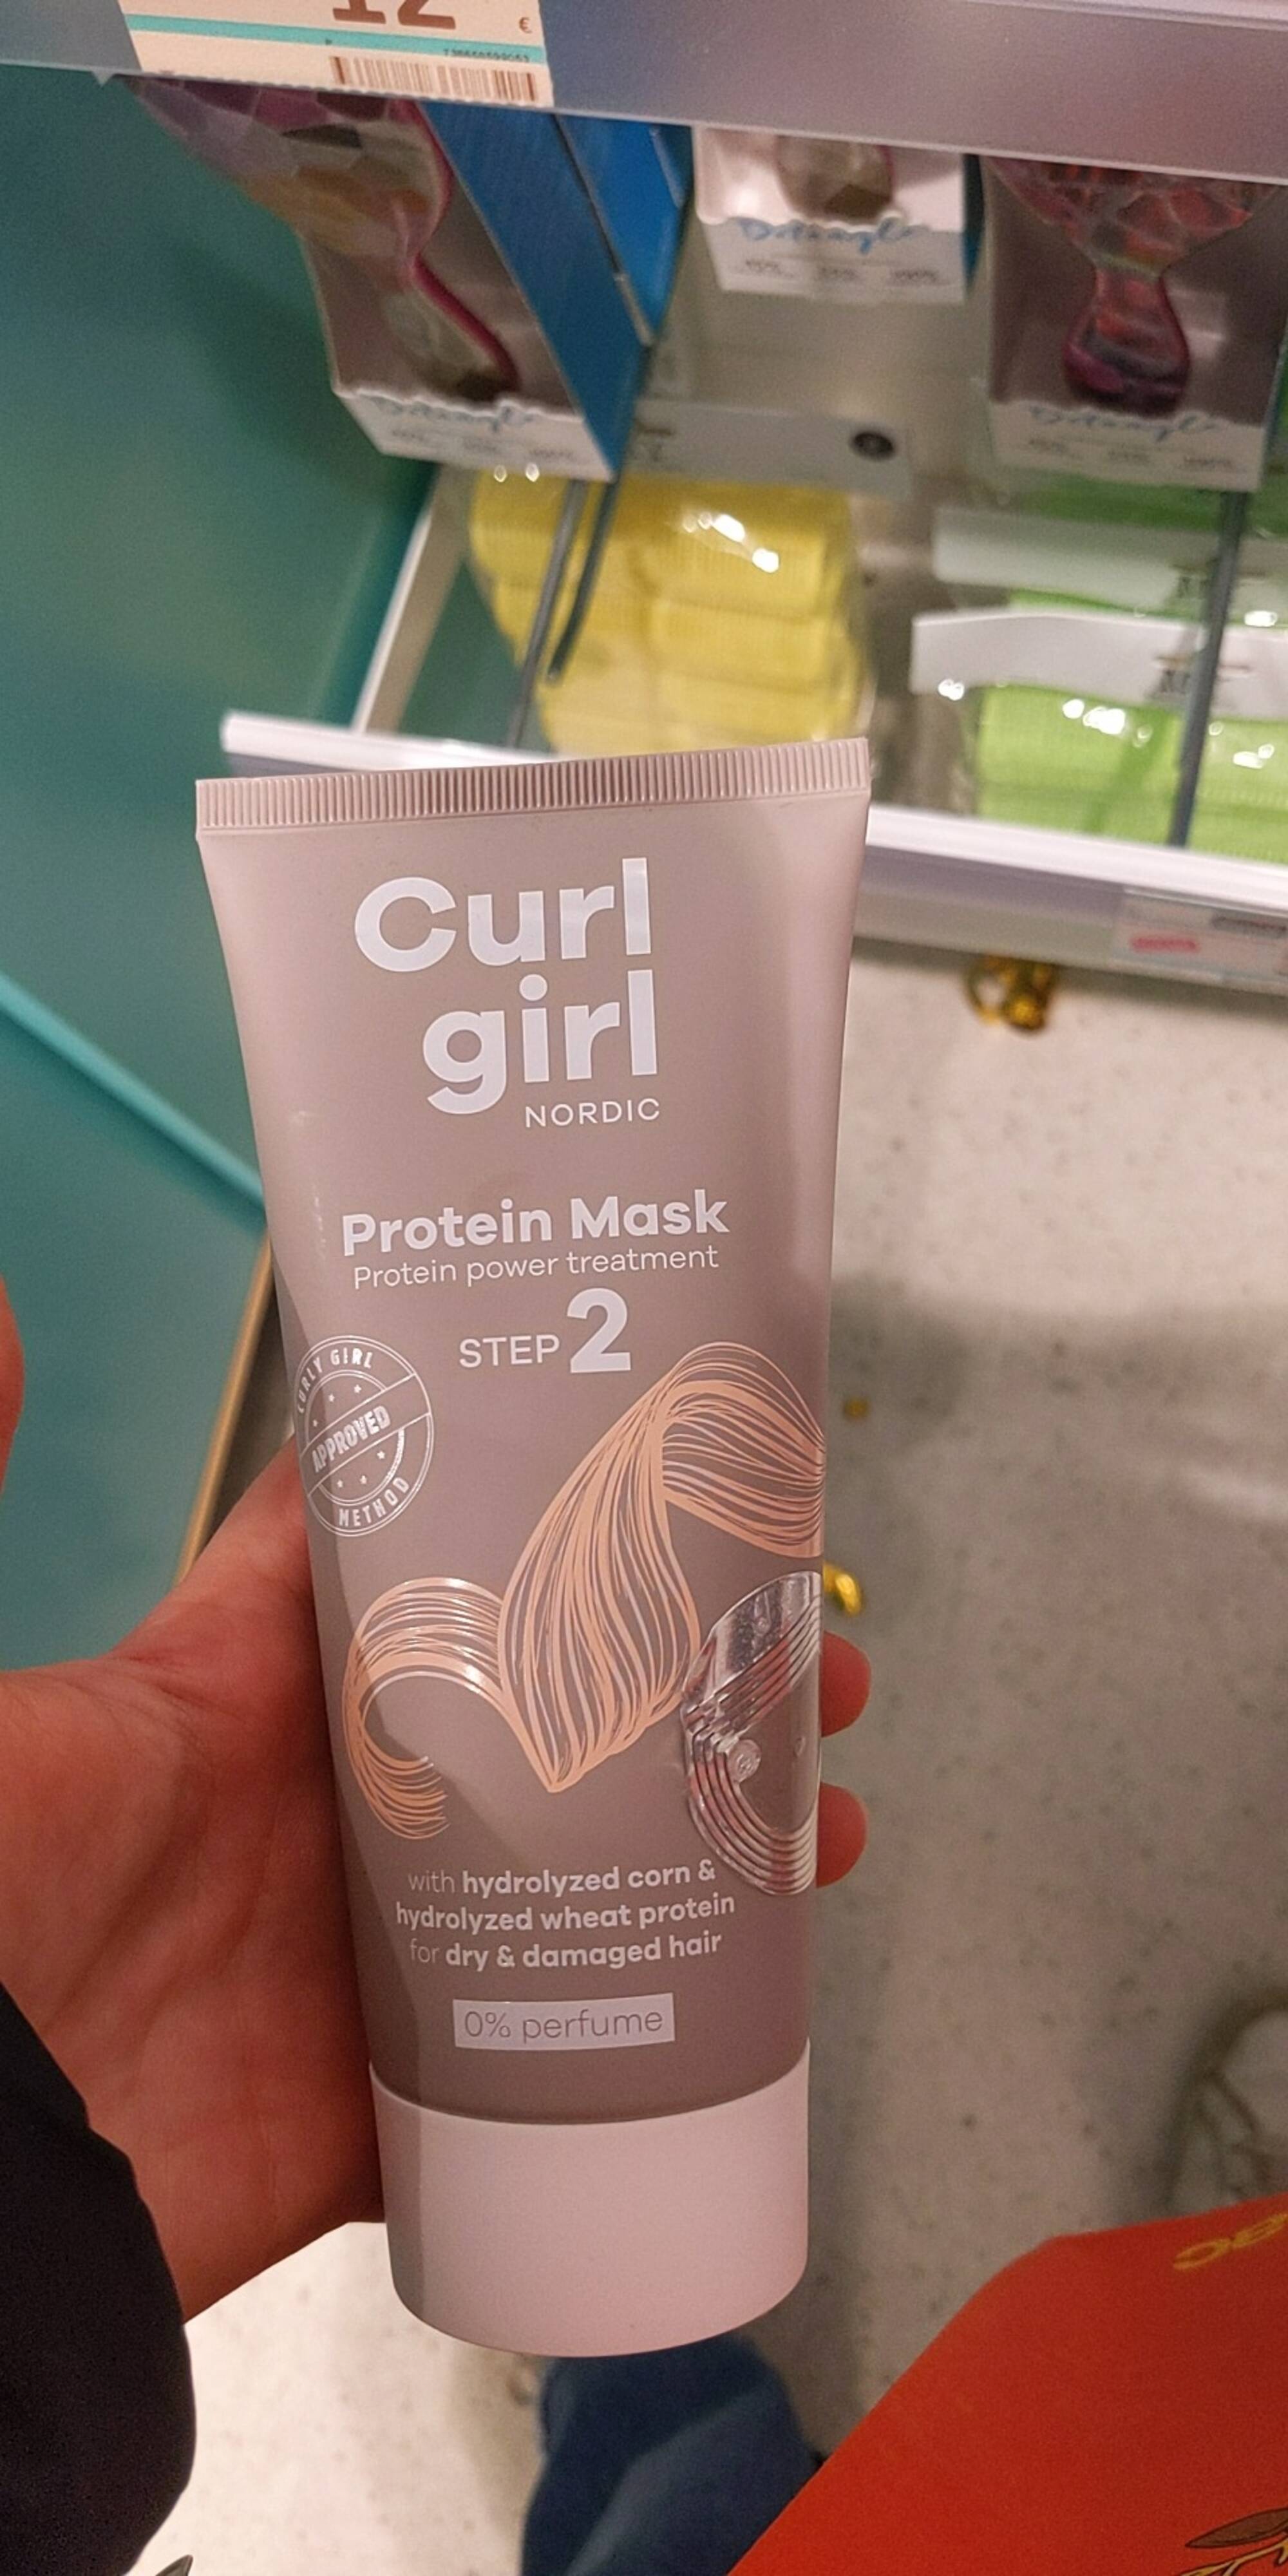 NORDIC - Curl girl - Protein mask 